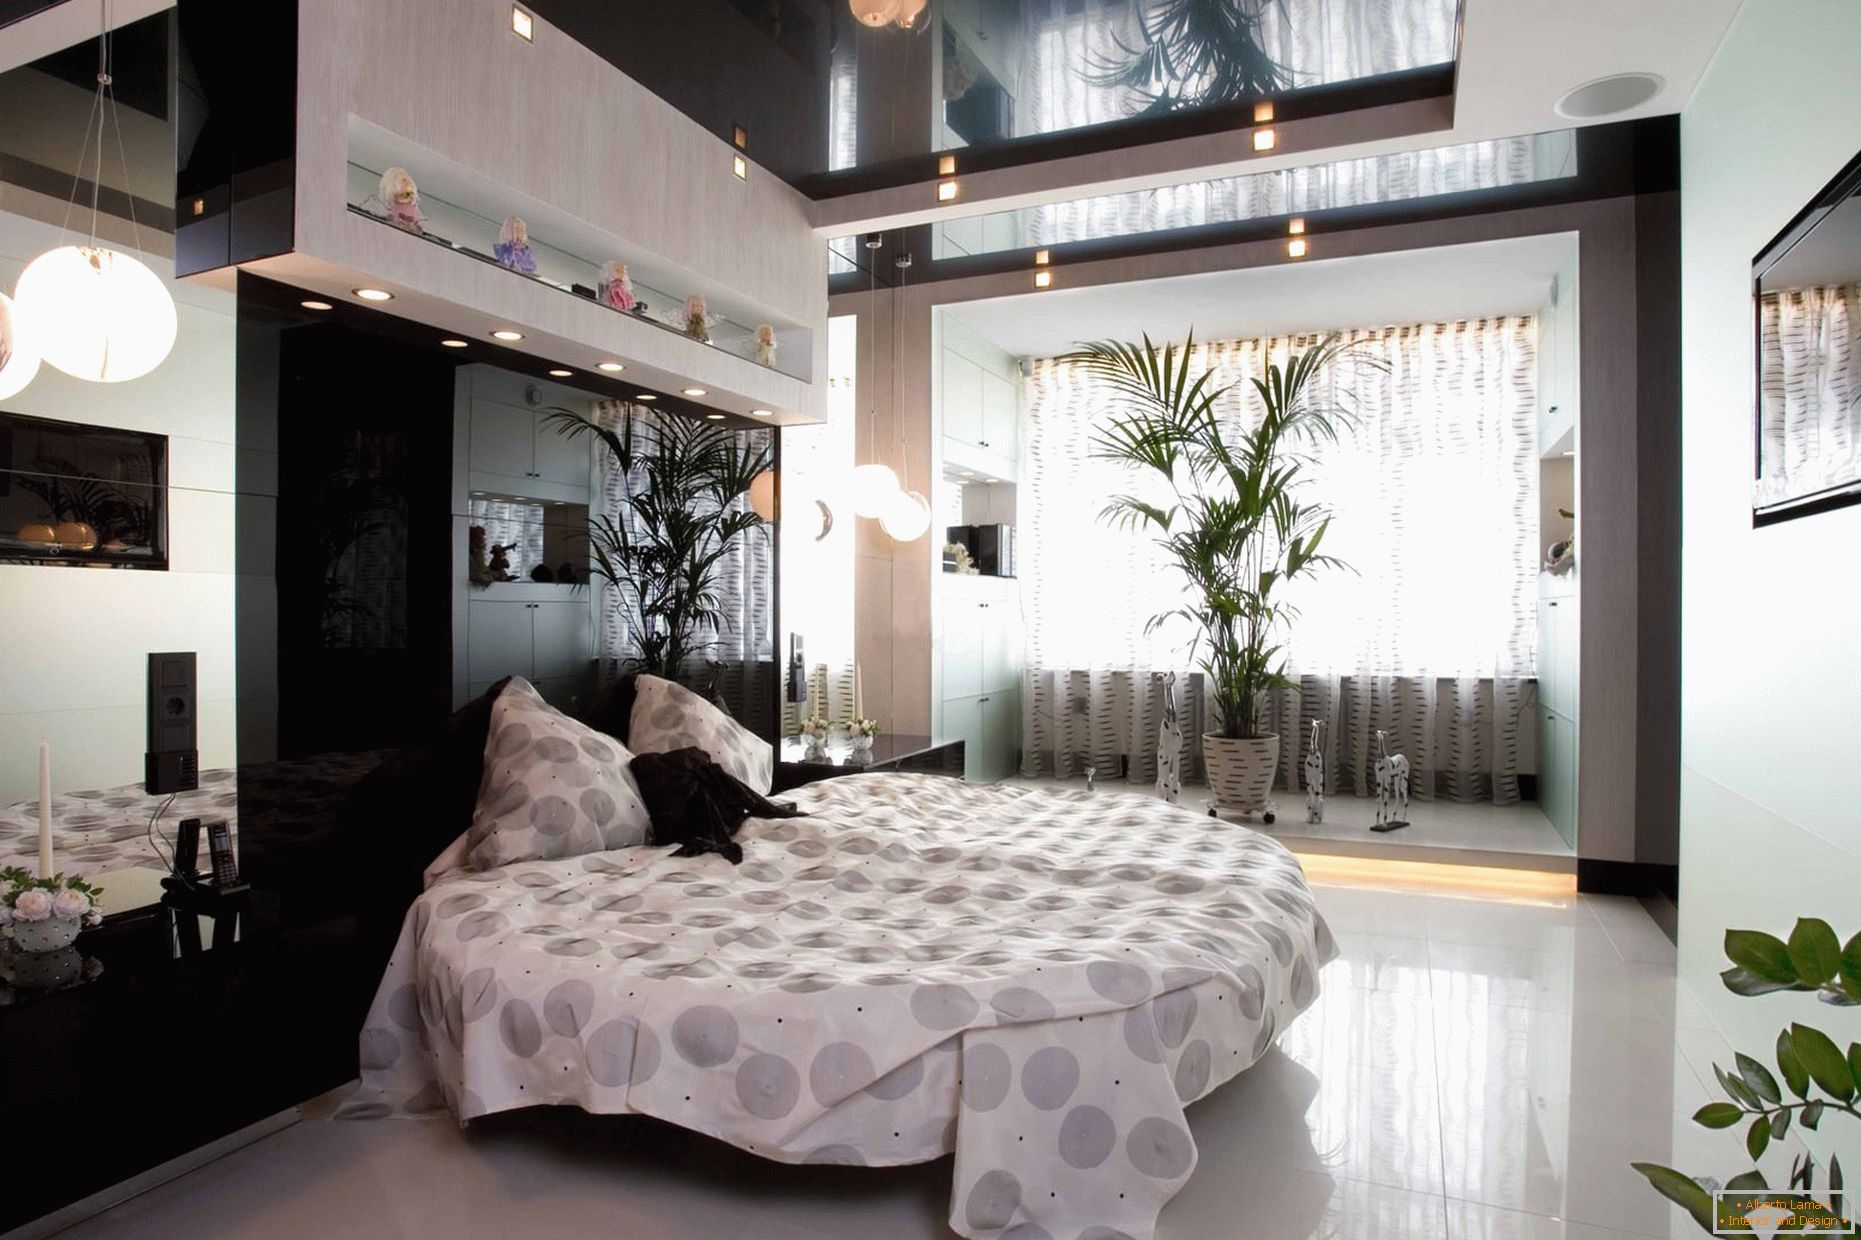 Stretch ceiling black in the modern bedroom